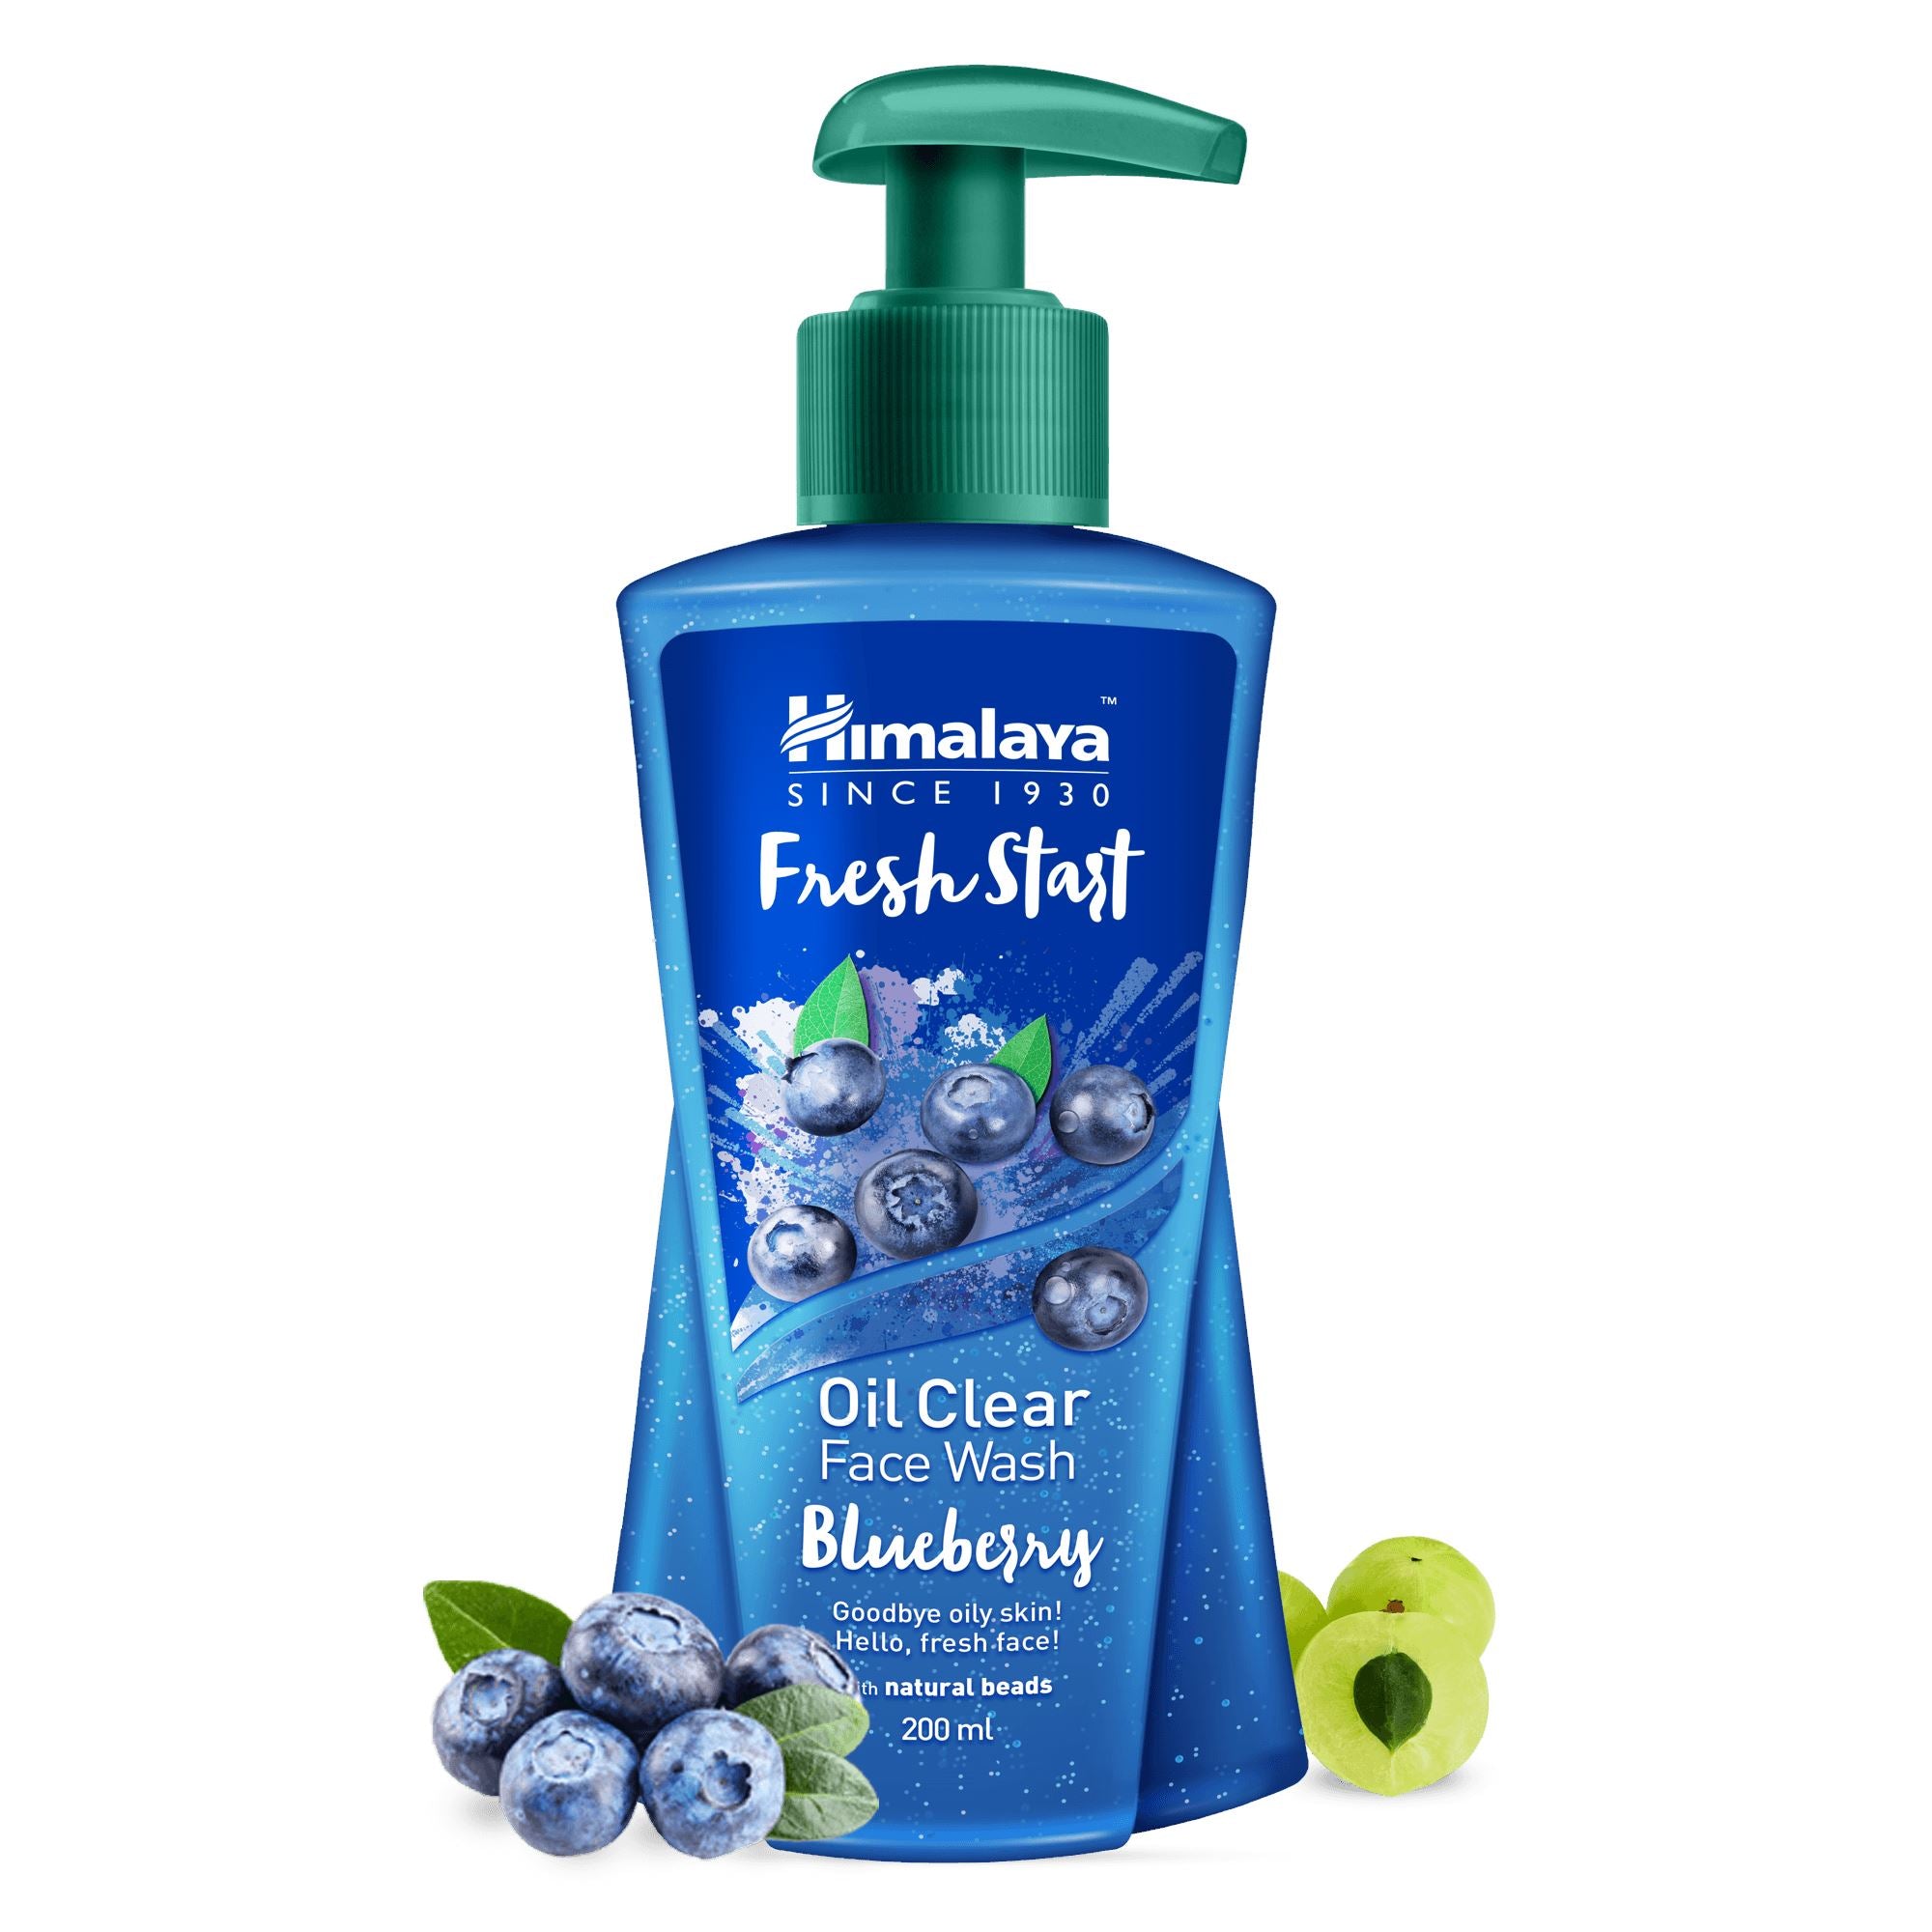 Himalaya Fresh Start Oil Clear Blueberry Face Wash 200ml - Helps remove excess oil, dirt, and impurities